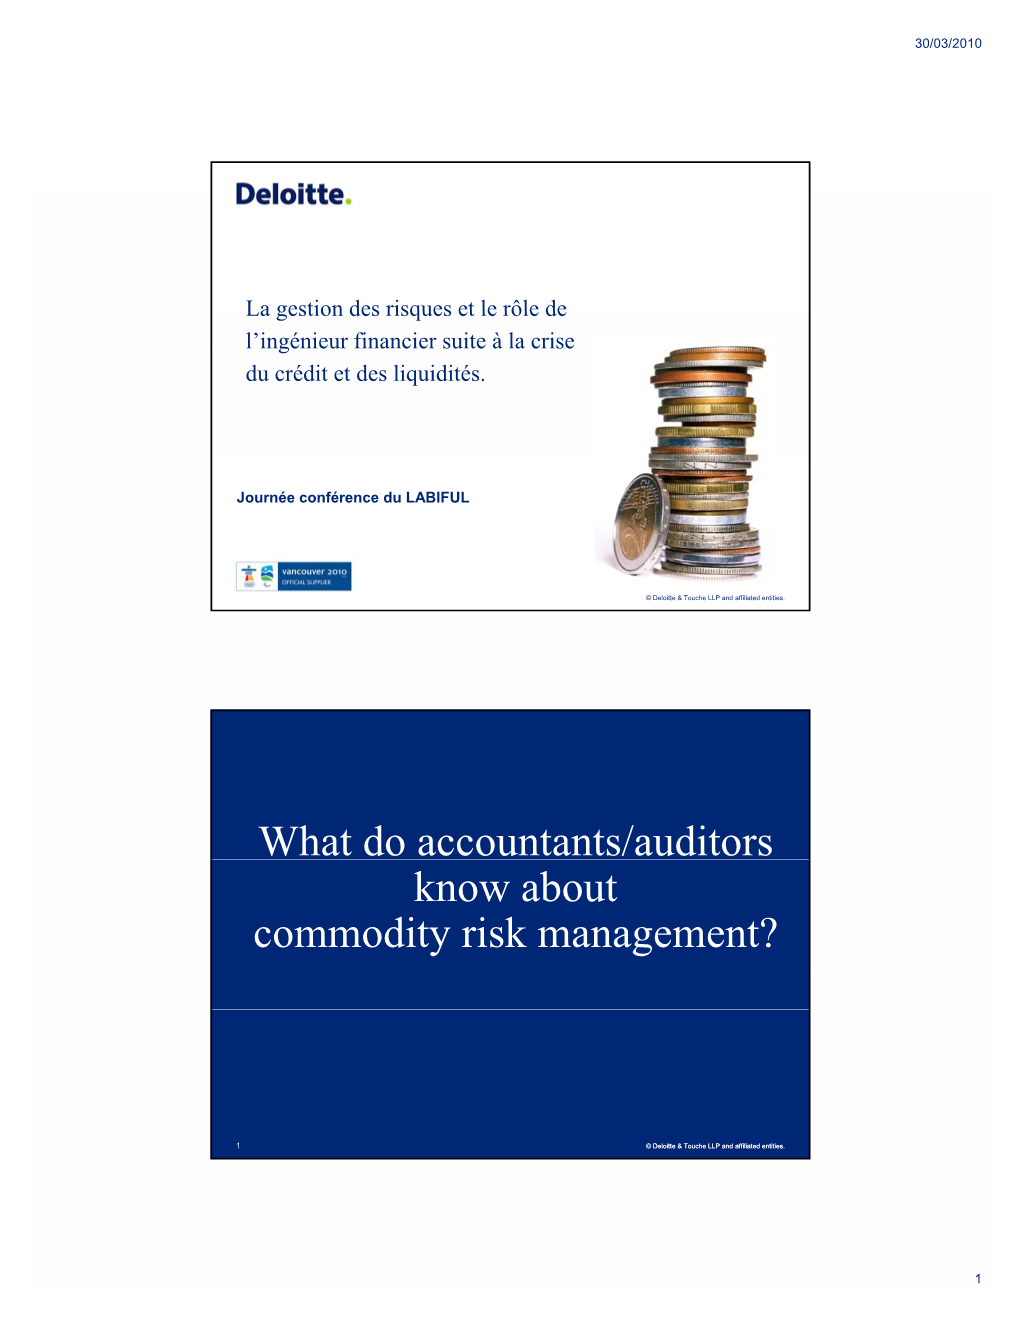 What Do Accountants/Auditors Know About Commodity Risk Management?